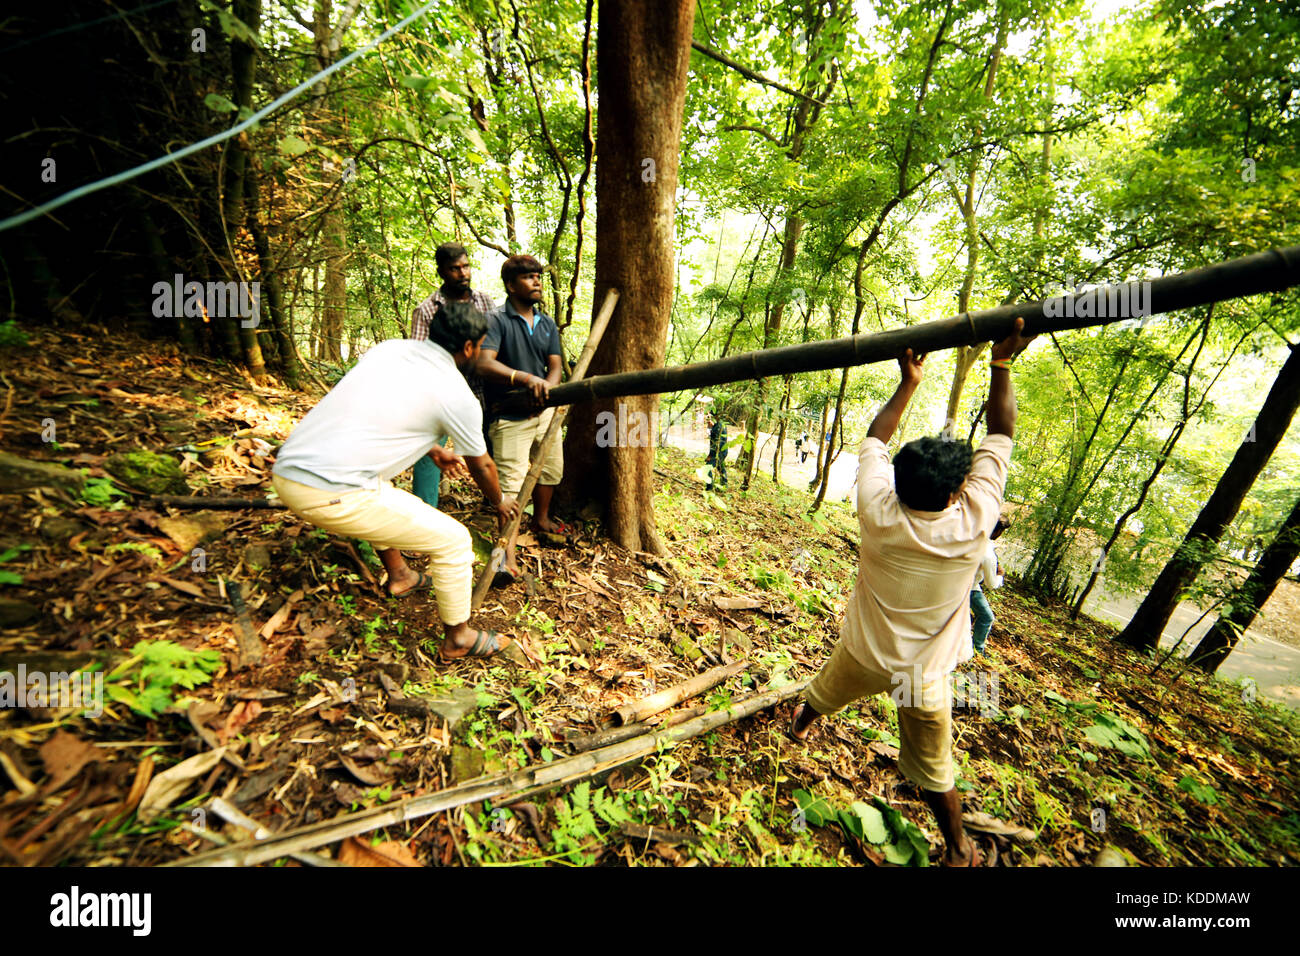 Film peoples carrying tree from forest, film set. Stock Photo